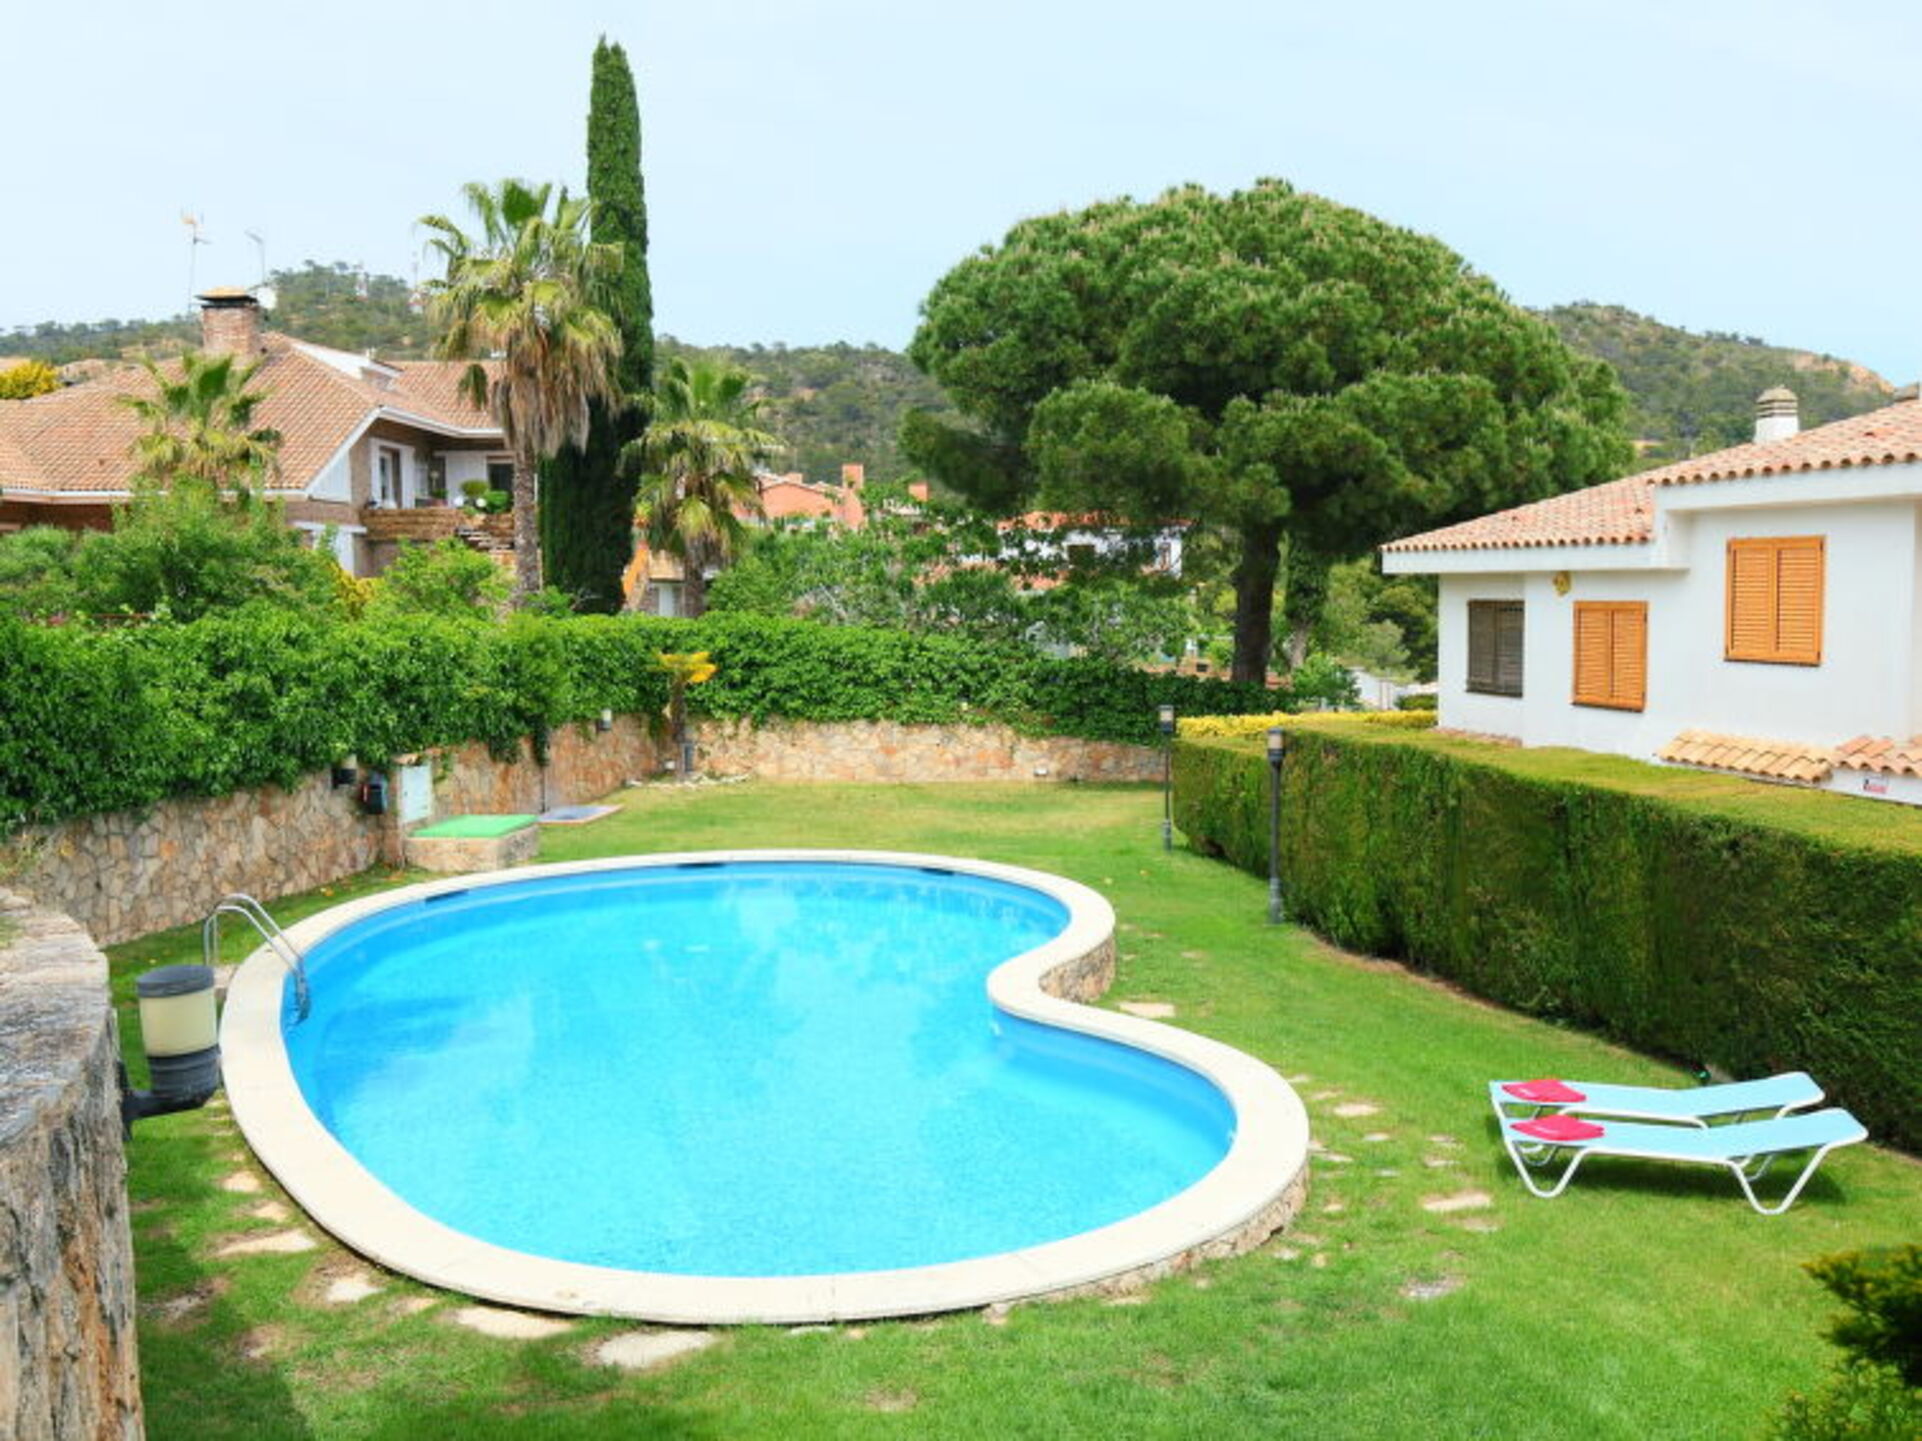 Property Image 1 - Property Manager Villa with First Class Amenities, Costa Brava Villa 1077